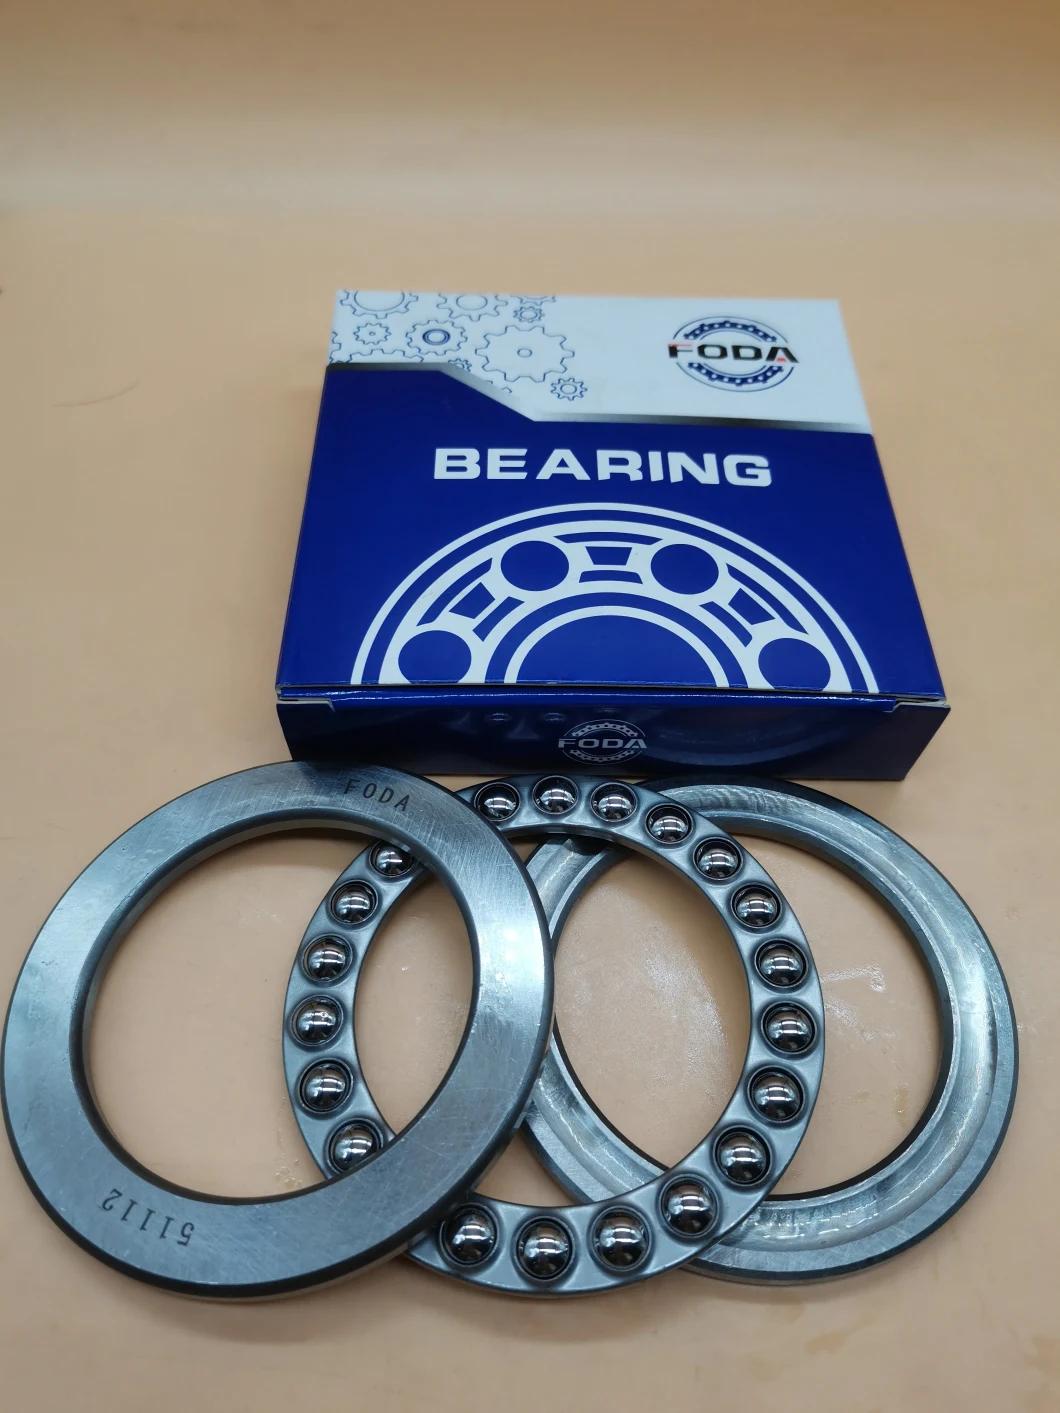 Unidirectional Thrust Ball Bearings/Low Speed Reducer/Foda High Quality Bearings Instead of Bearings/Thrust Ball Bearings of 51340